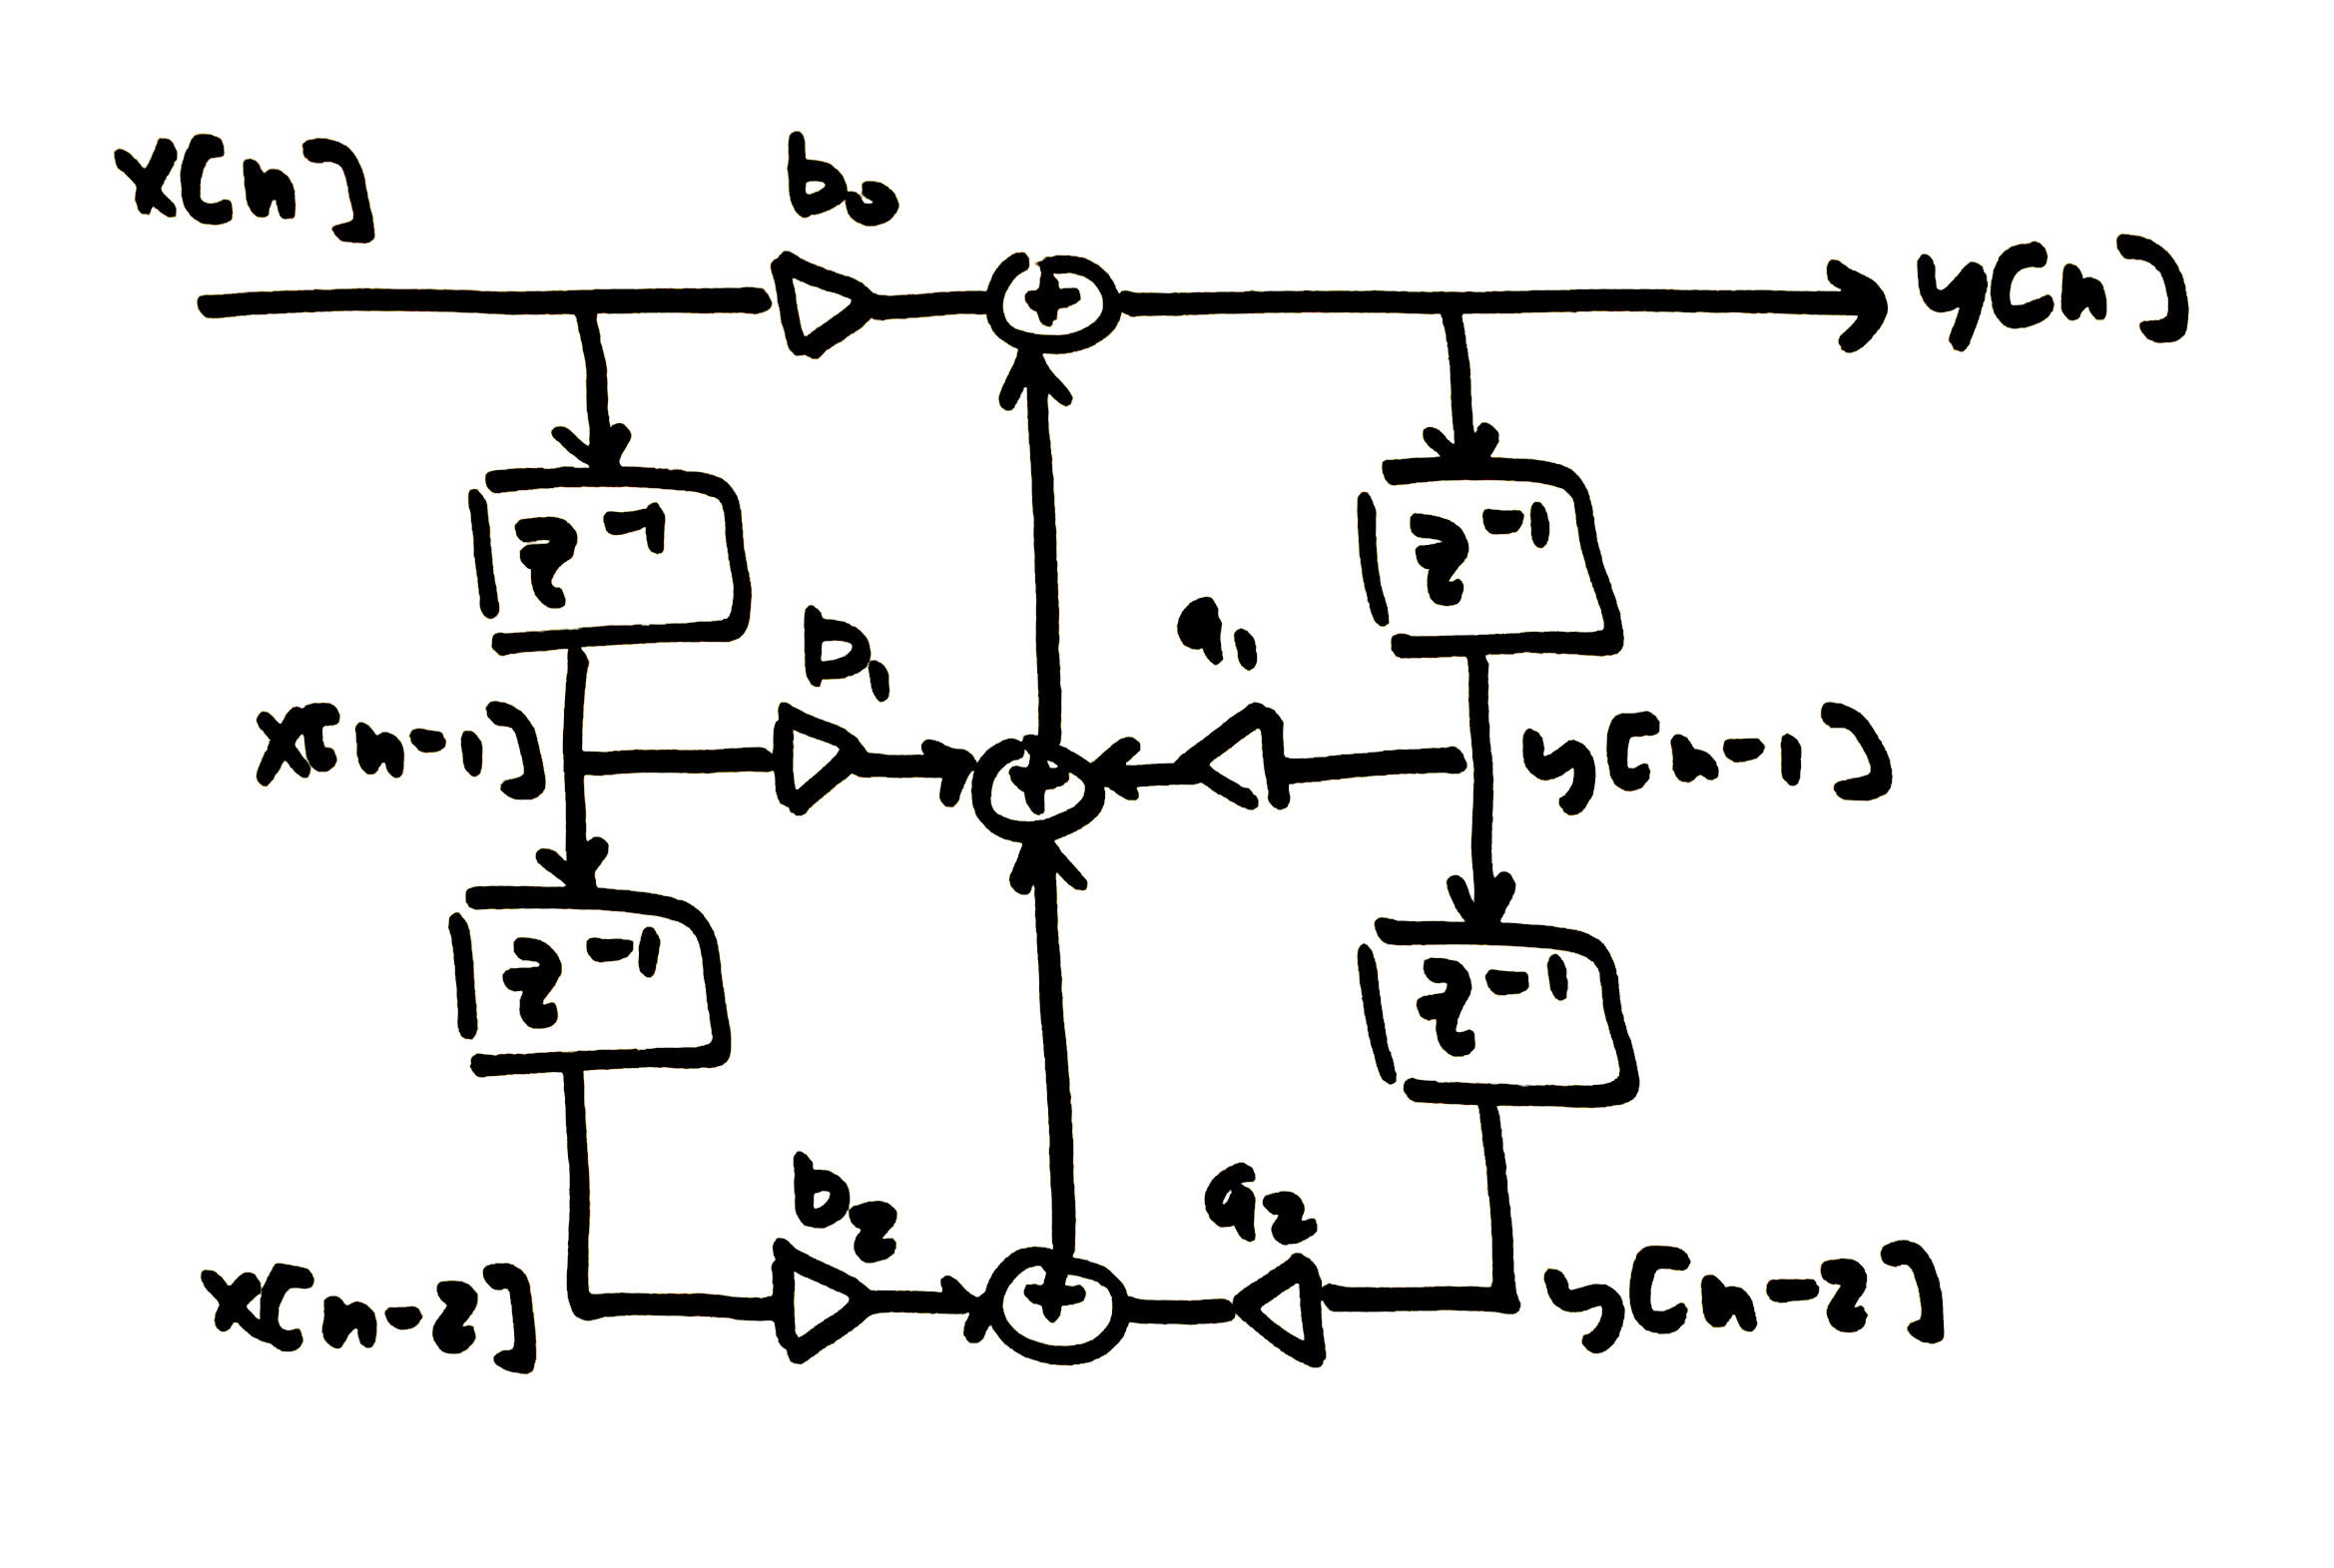 Figure 3: An example of a time invariant IIR filter. Note that an IIR filter can be transformed into an FIR filter by setting all feedback coefficients to zero.